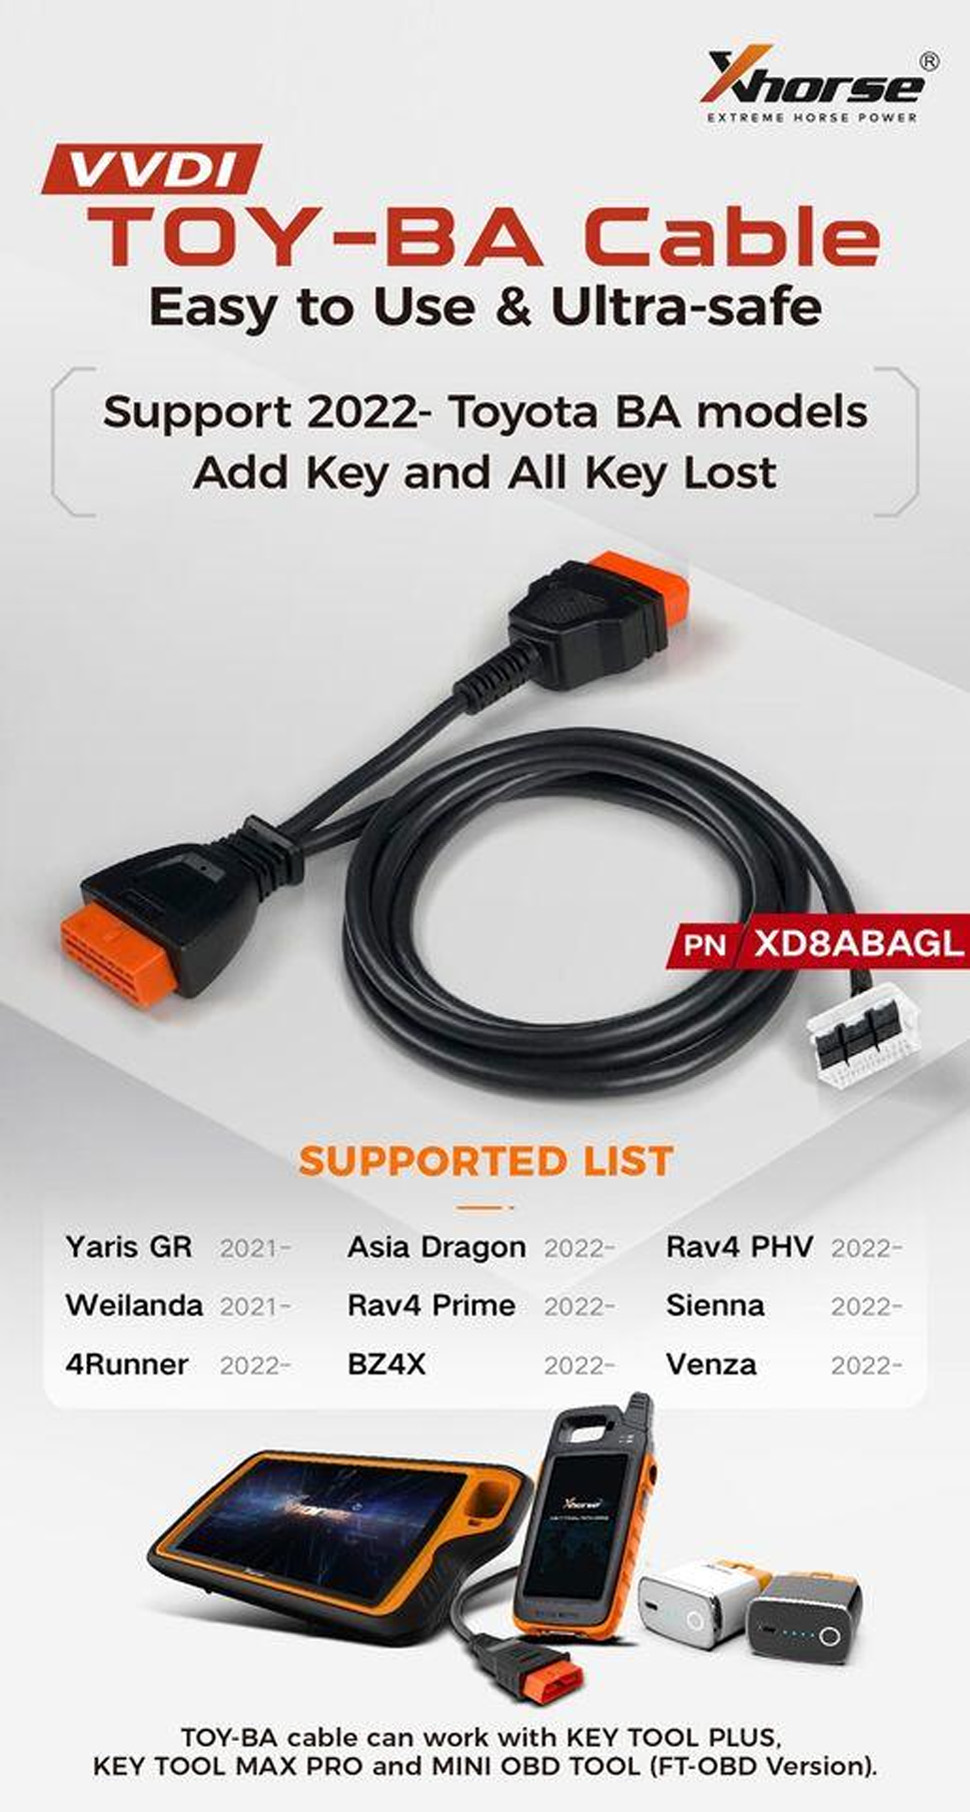 Xhorse VVDI Toyota BA All Key Lost Cable